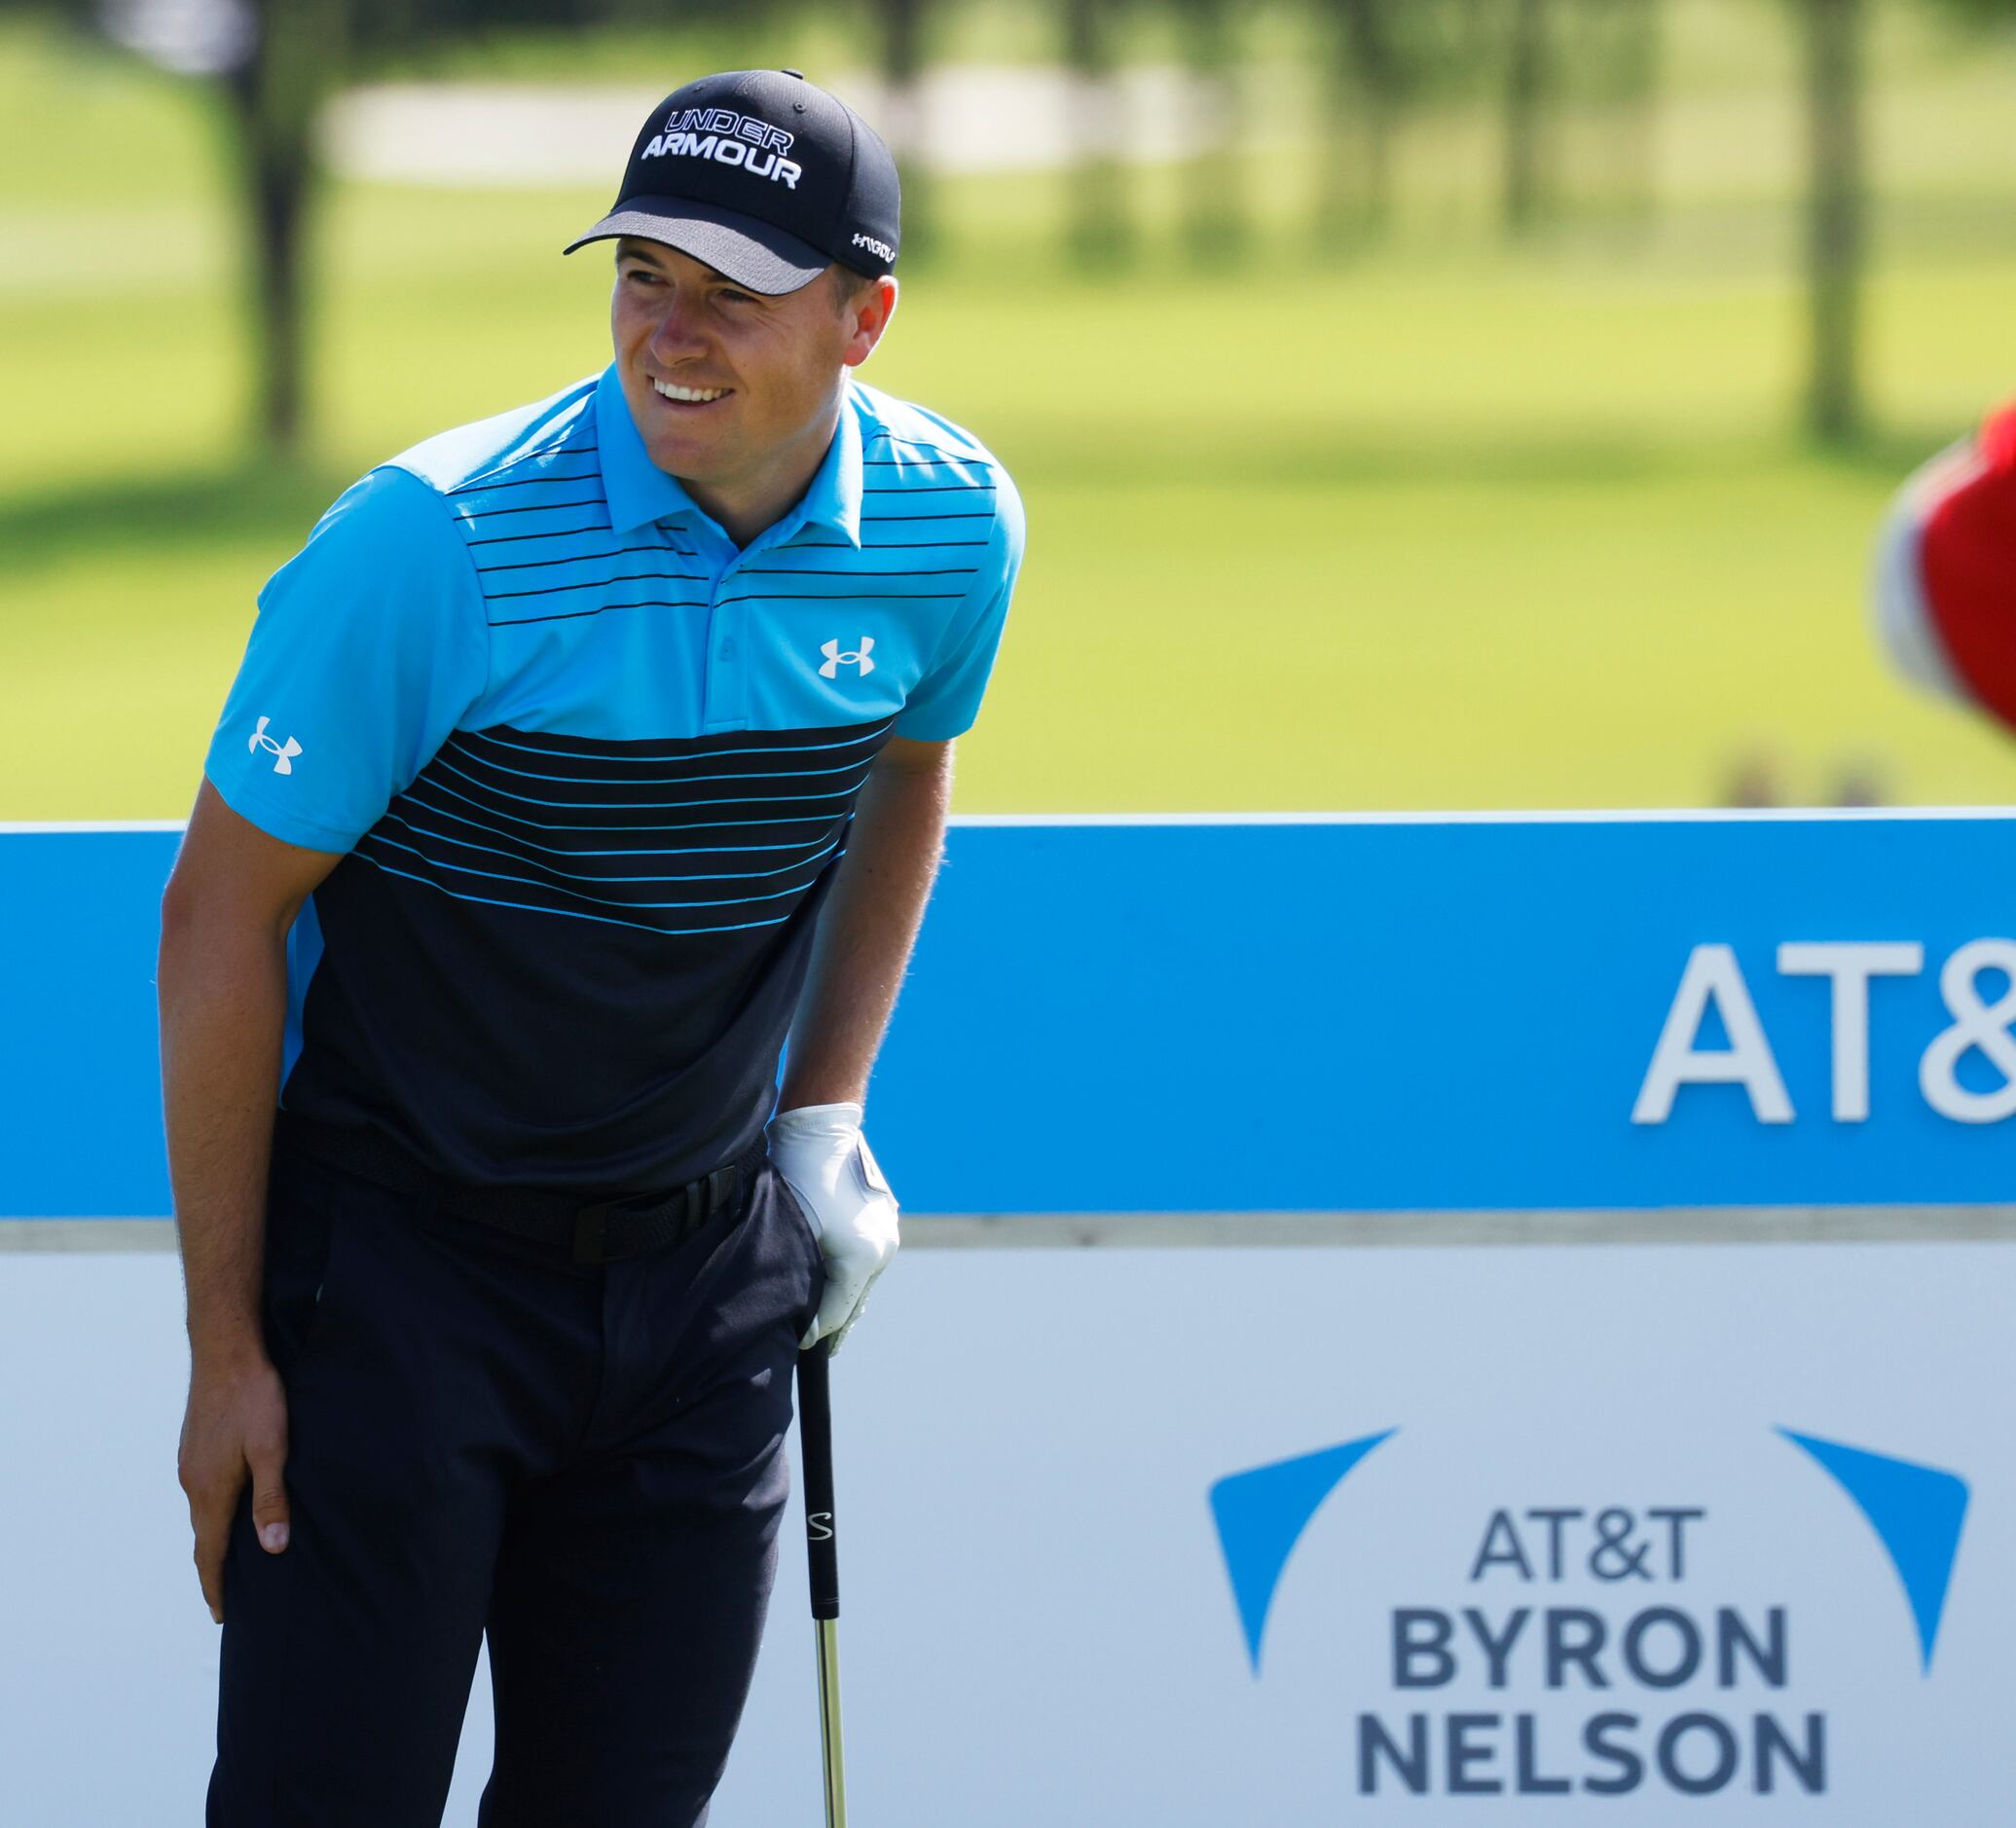 Jordan Spieth smiles after teeing off on the 15th hole during round 1 of the AT&T Byron...